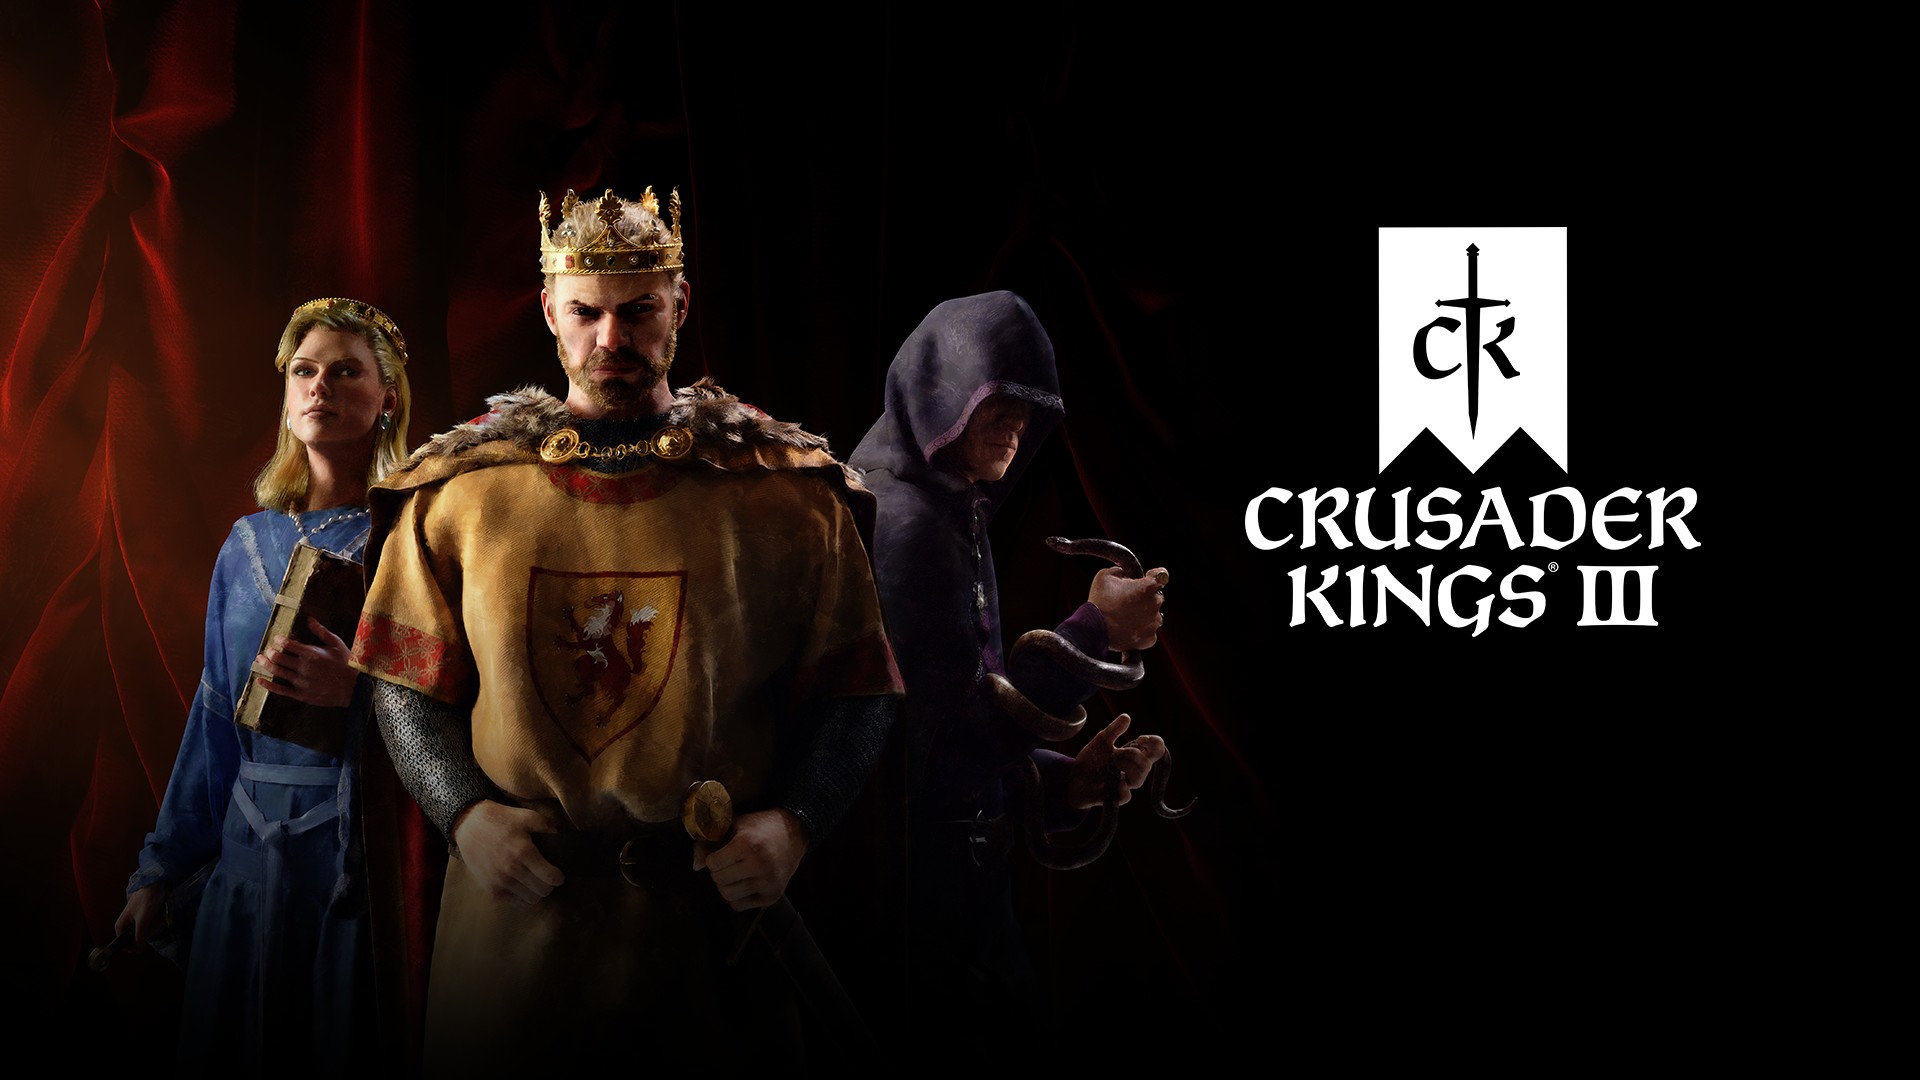 Video For Crusader Kings III Rides to Glory on September 1